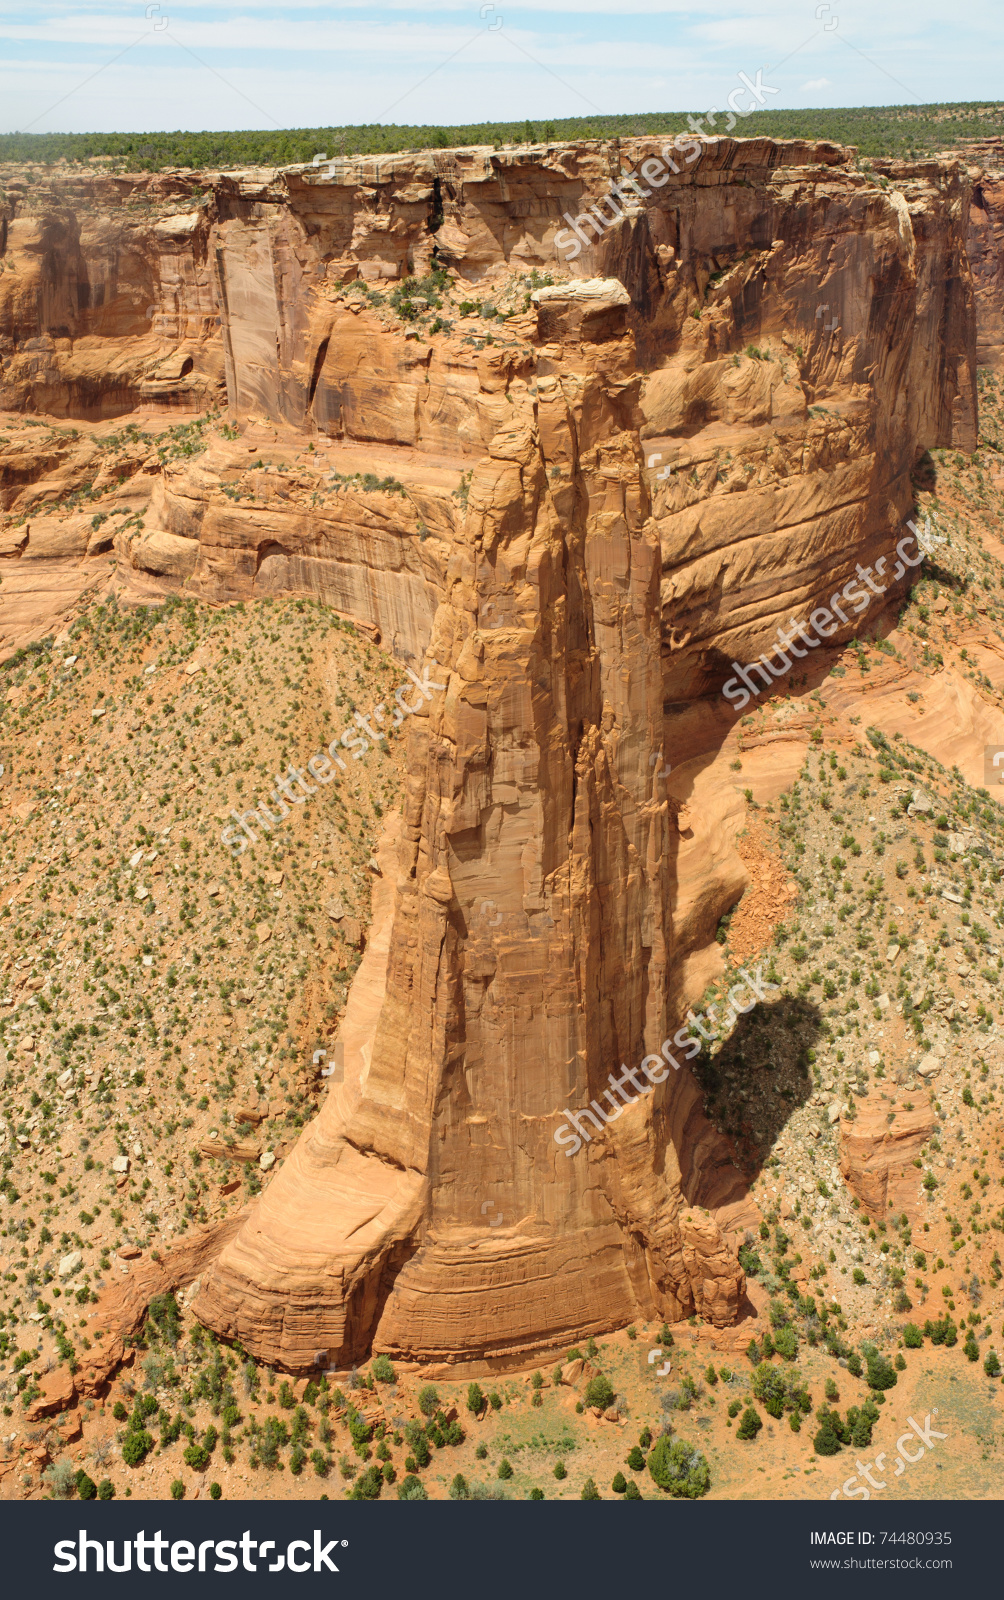 Canyon De Chelly National Monument clipart #7, Download drawings